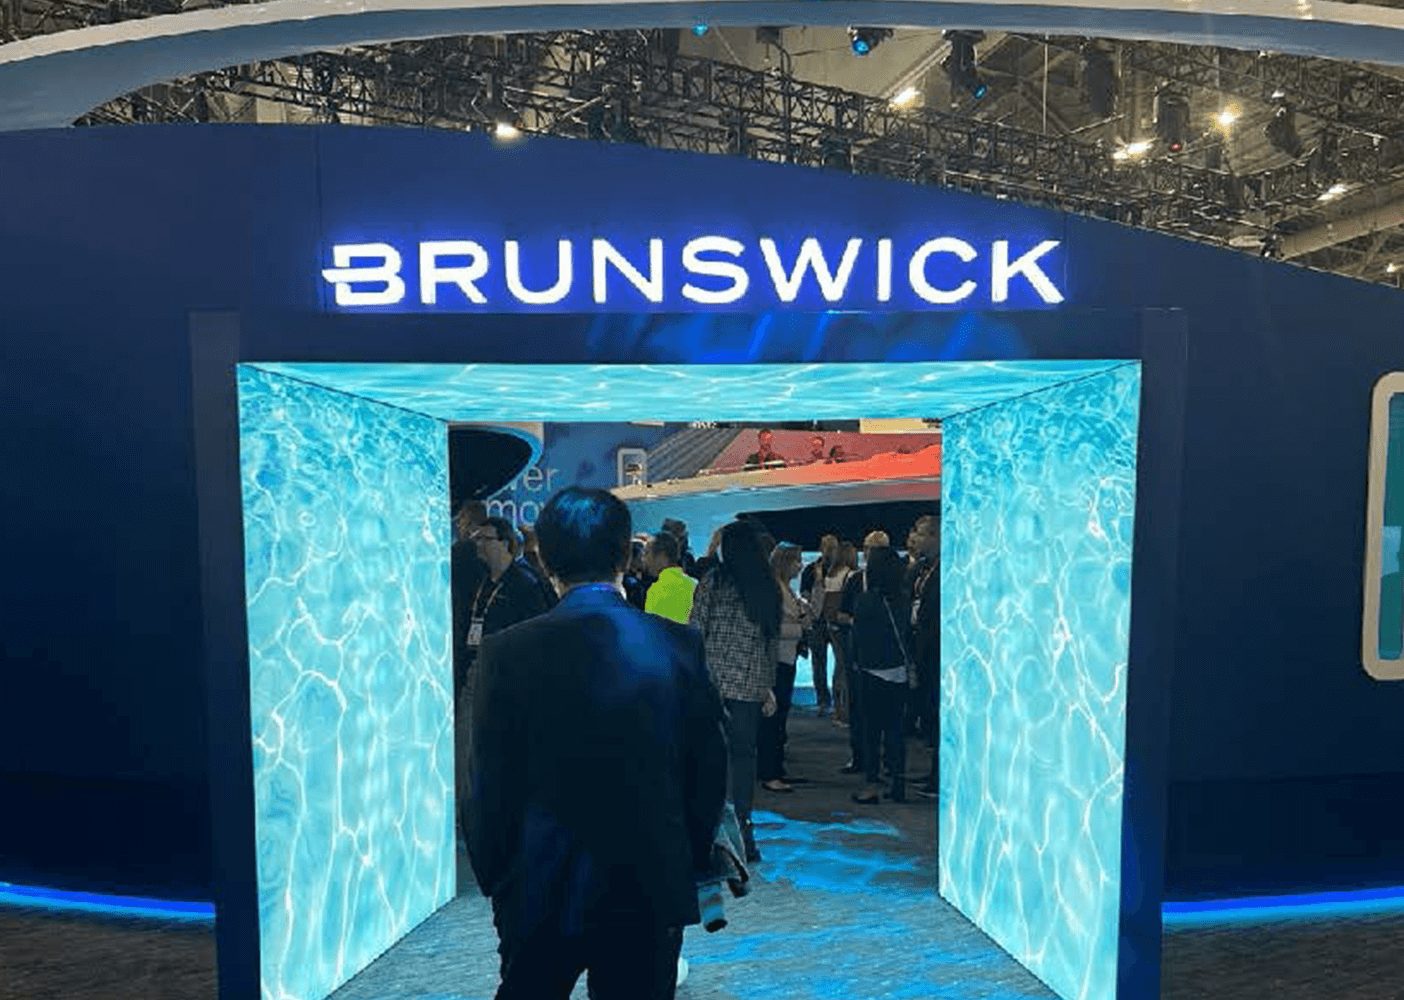 The entrance to the Brunswick exhibit at CES 2023